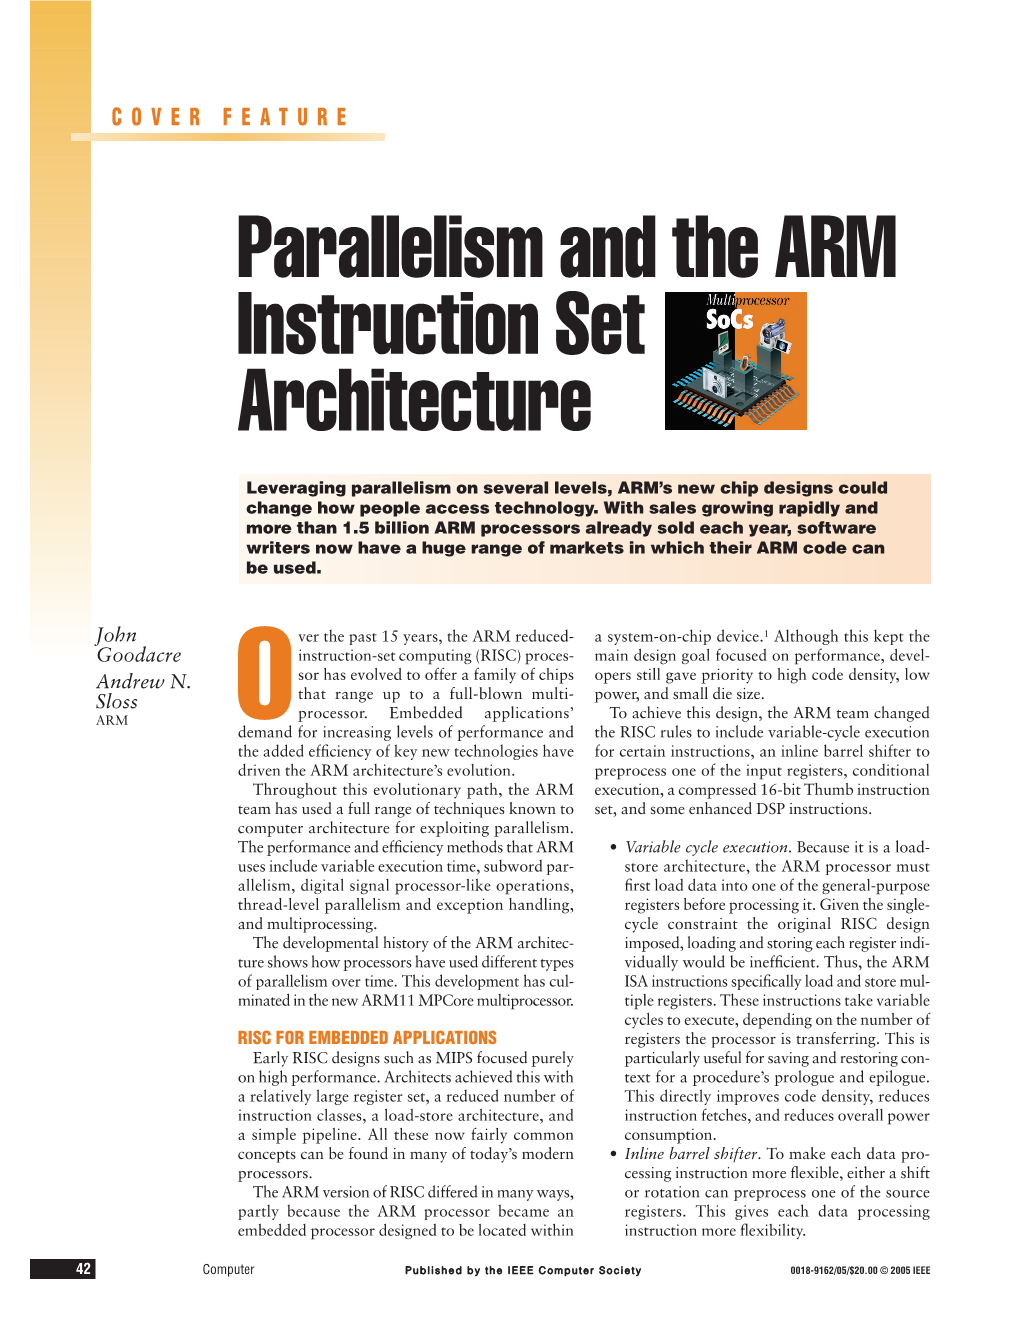 Parallelism and the ARM Instruction Set Architecture